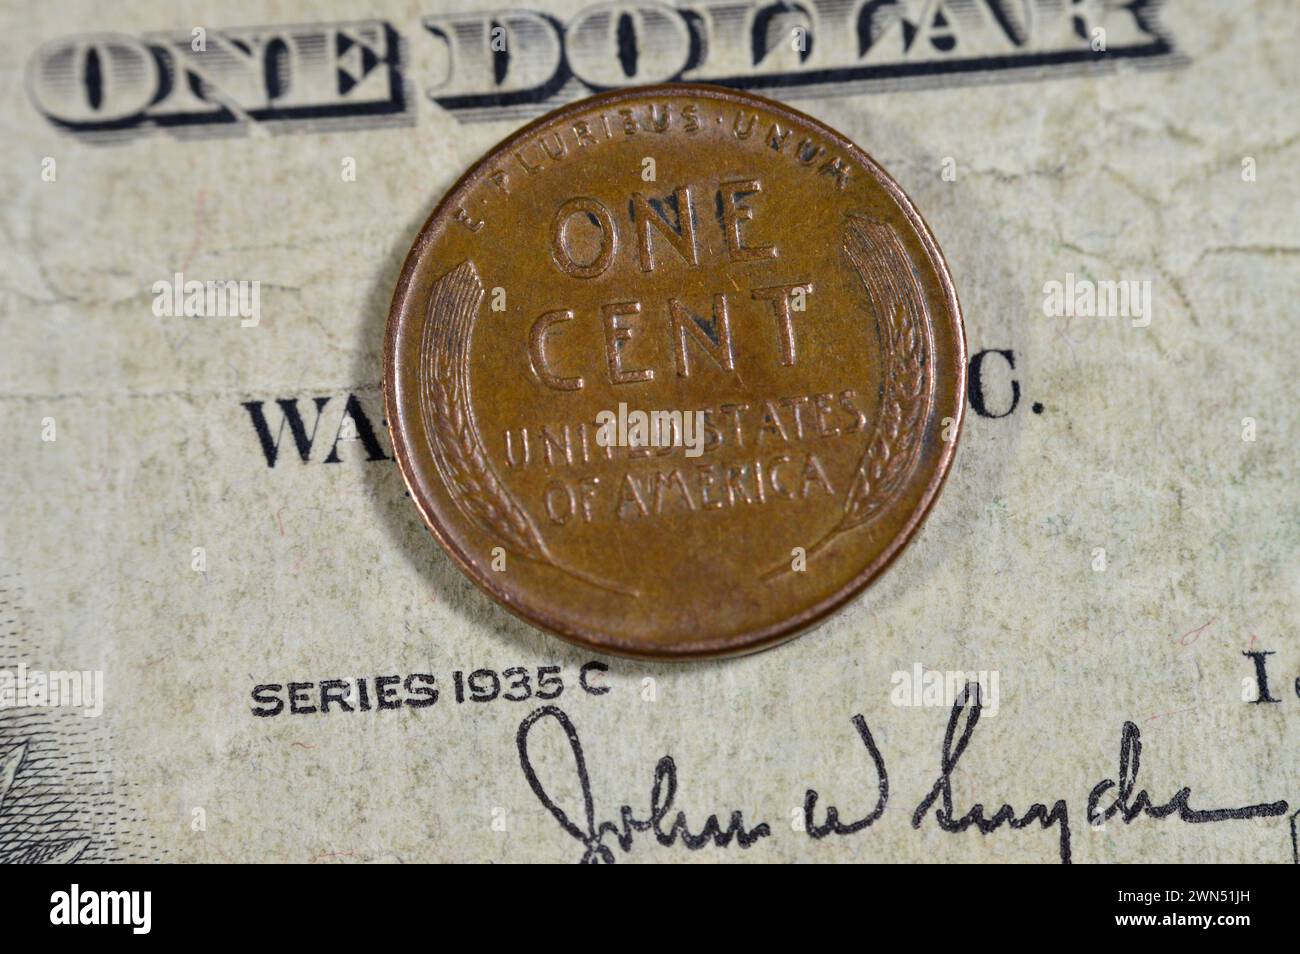 Two wheat ears surrounding lettering on the reverse side of One American cent coin series 1957, Obverse side features Abraham Lincoln the 16th preside Stock Photo